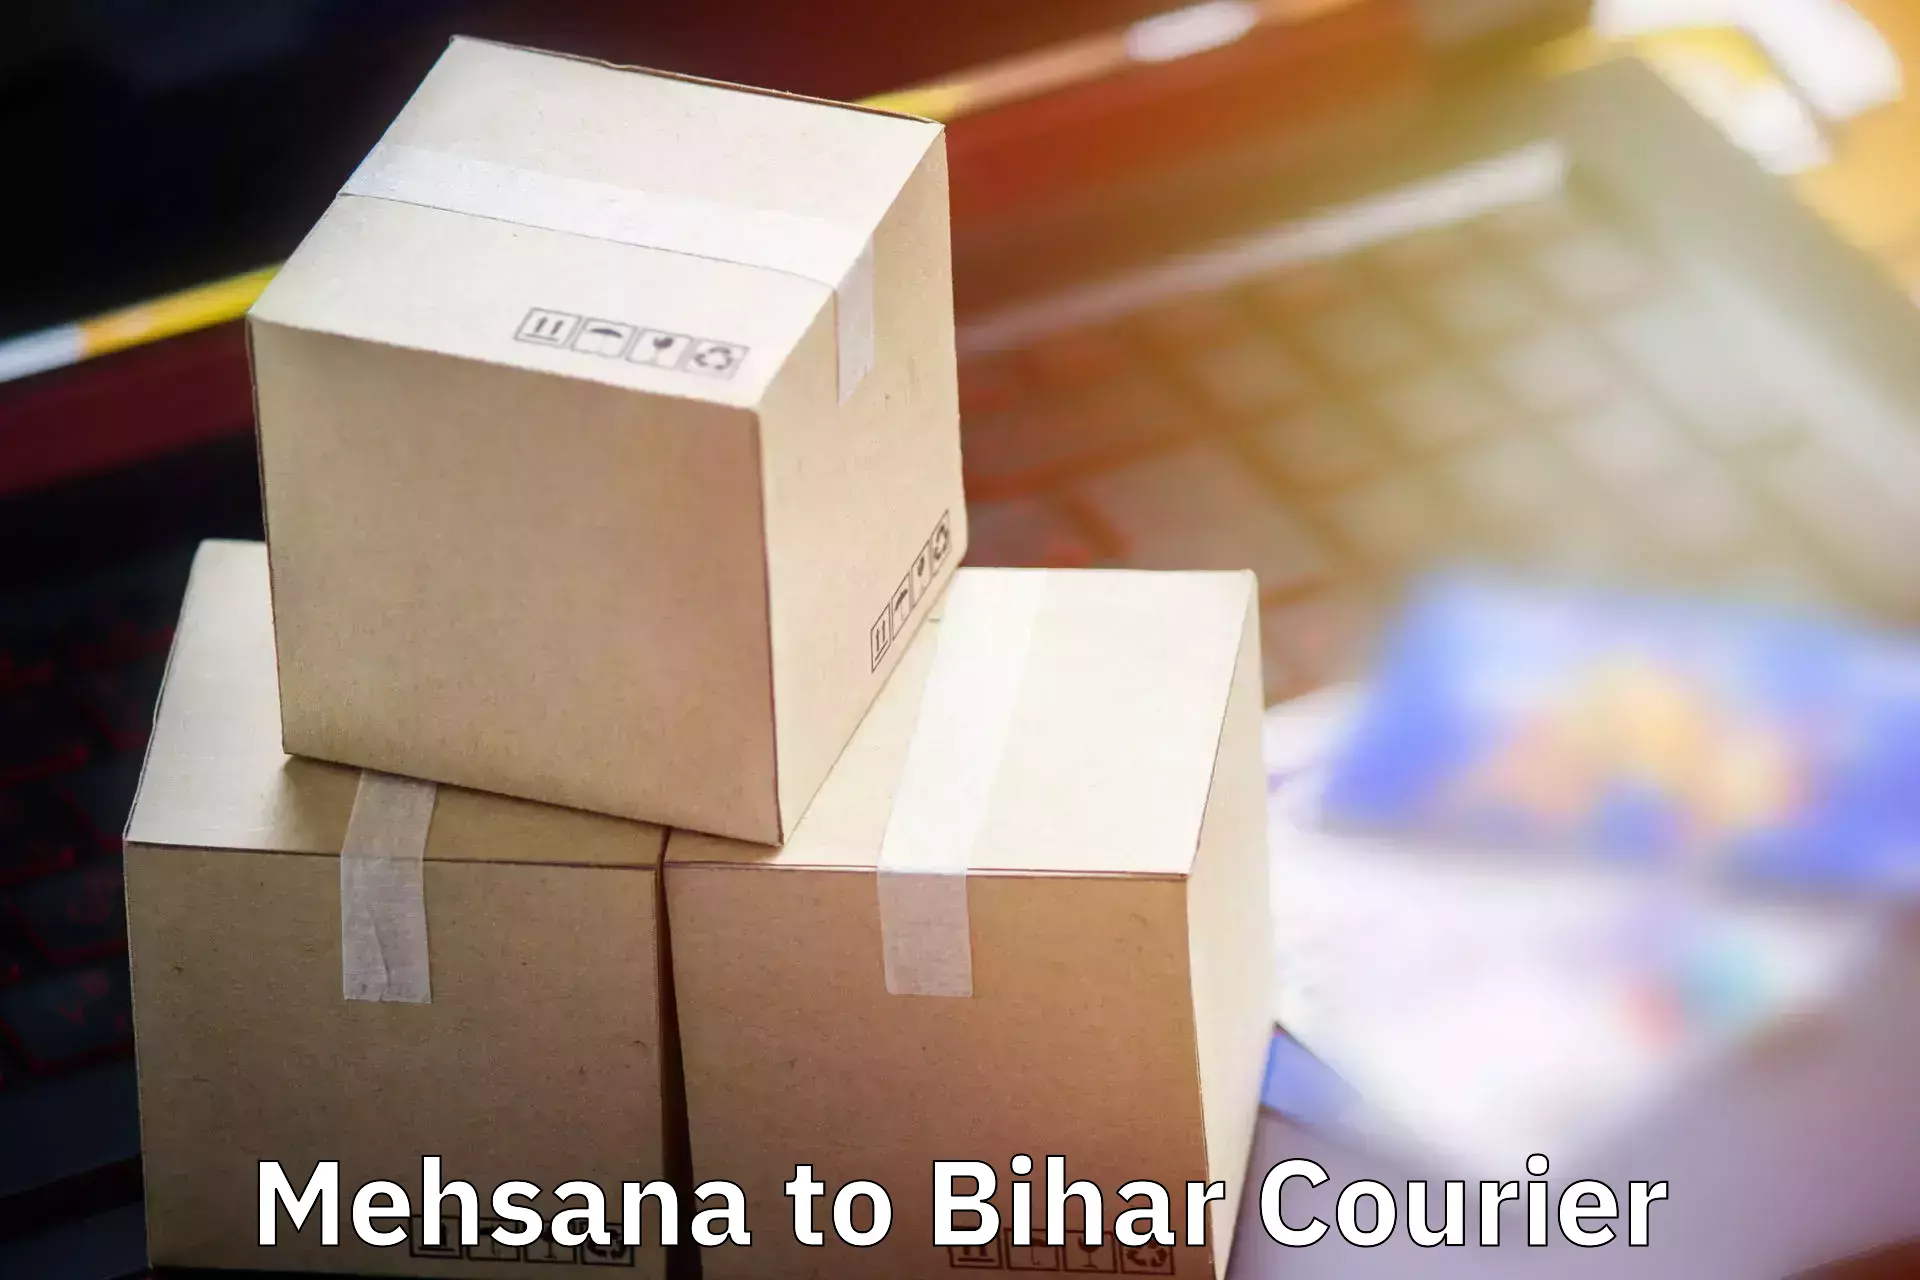 Baggage transport network Mehsana to Jehanabad